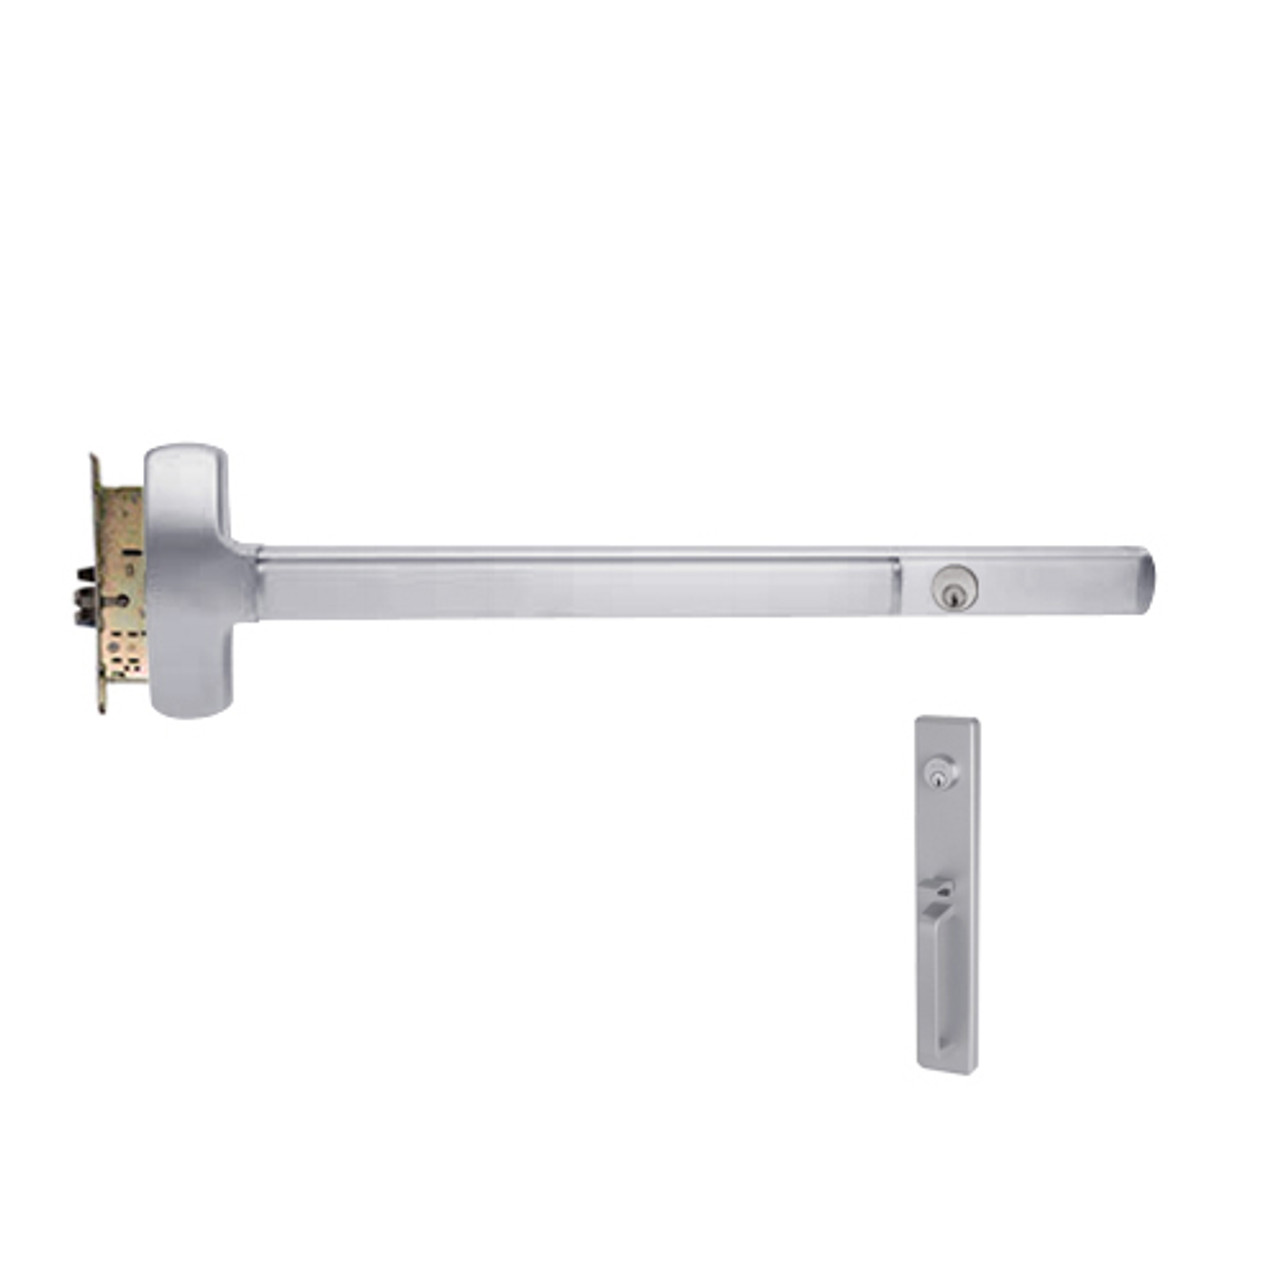 CD25-M-TP-US32-4-RHR Falcon Exit Device in Polished Stainless Steel